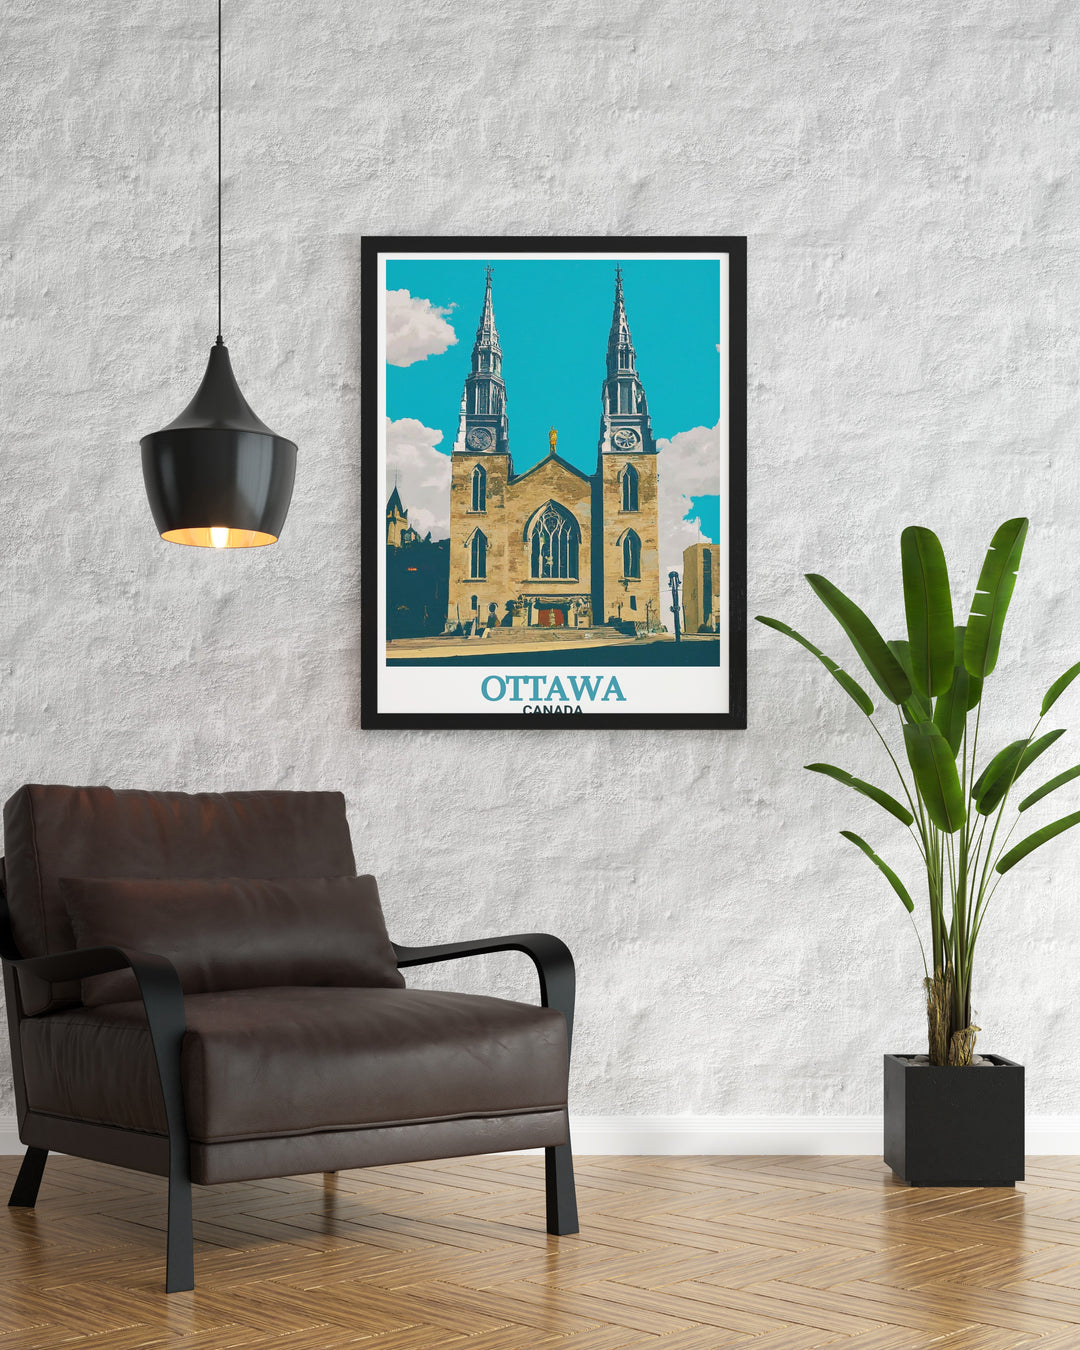 Notre Dame Cathedral Basilica artwork in a beautiful Ottawa city map. Ideal for adding a touch of Canadian heritage to your space. The print highlights the cathedrals architectural beauty and the citys vibrant culture, making it a great addition to any collection.